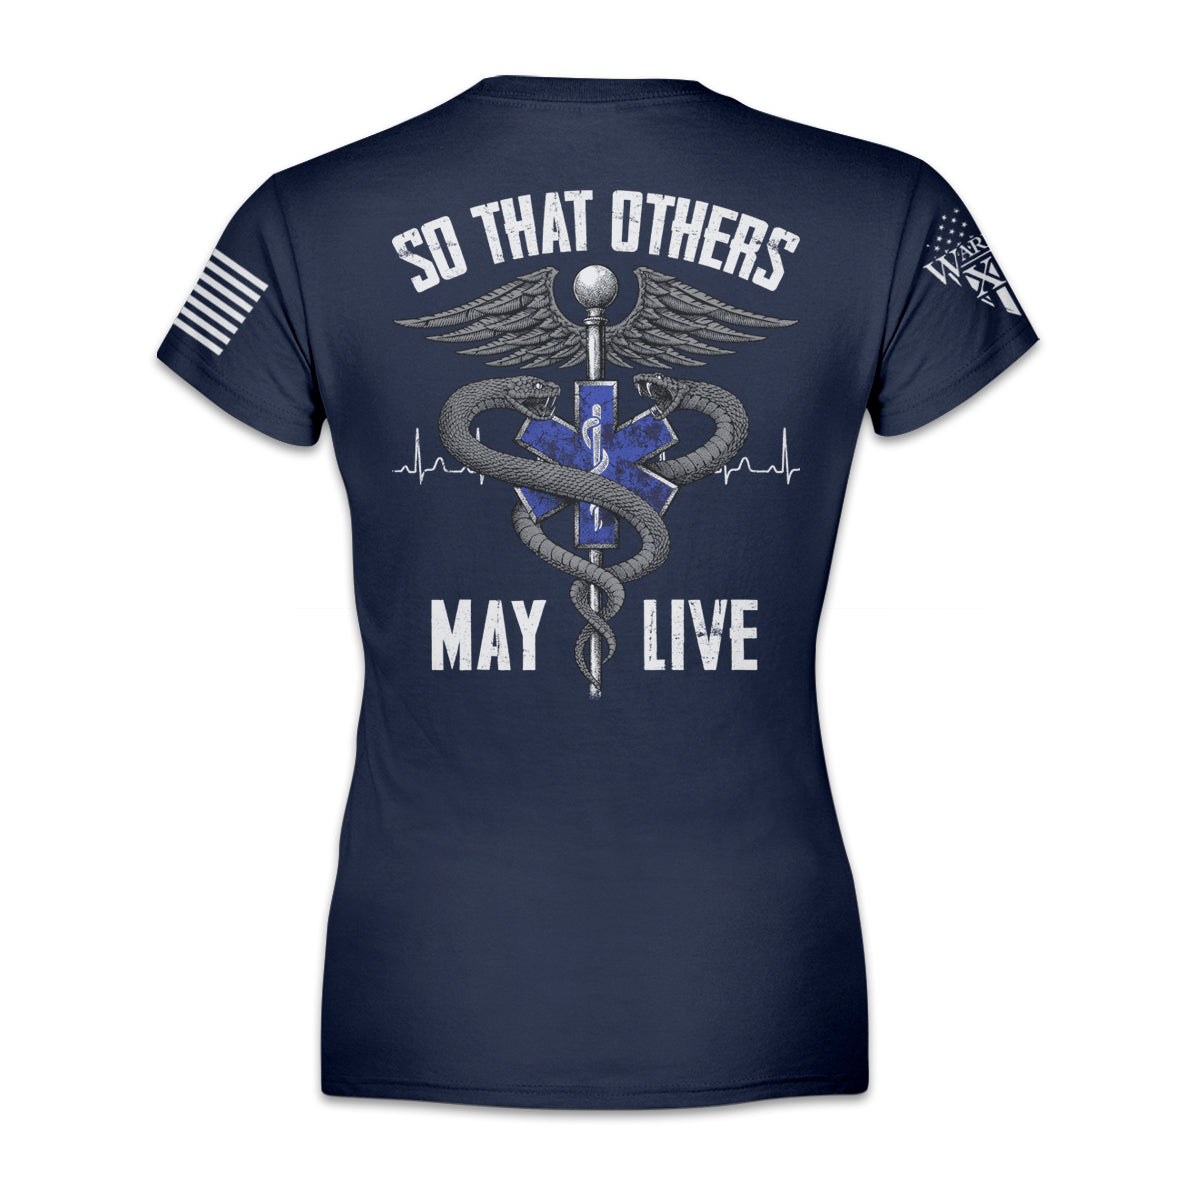 A navy blue women's relaxed fit shirt with the words "So That Others May Live" with the health symbol printed on the back of the shirt.